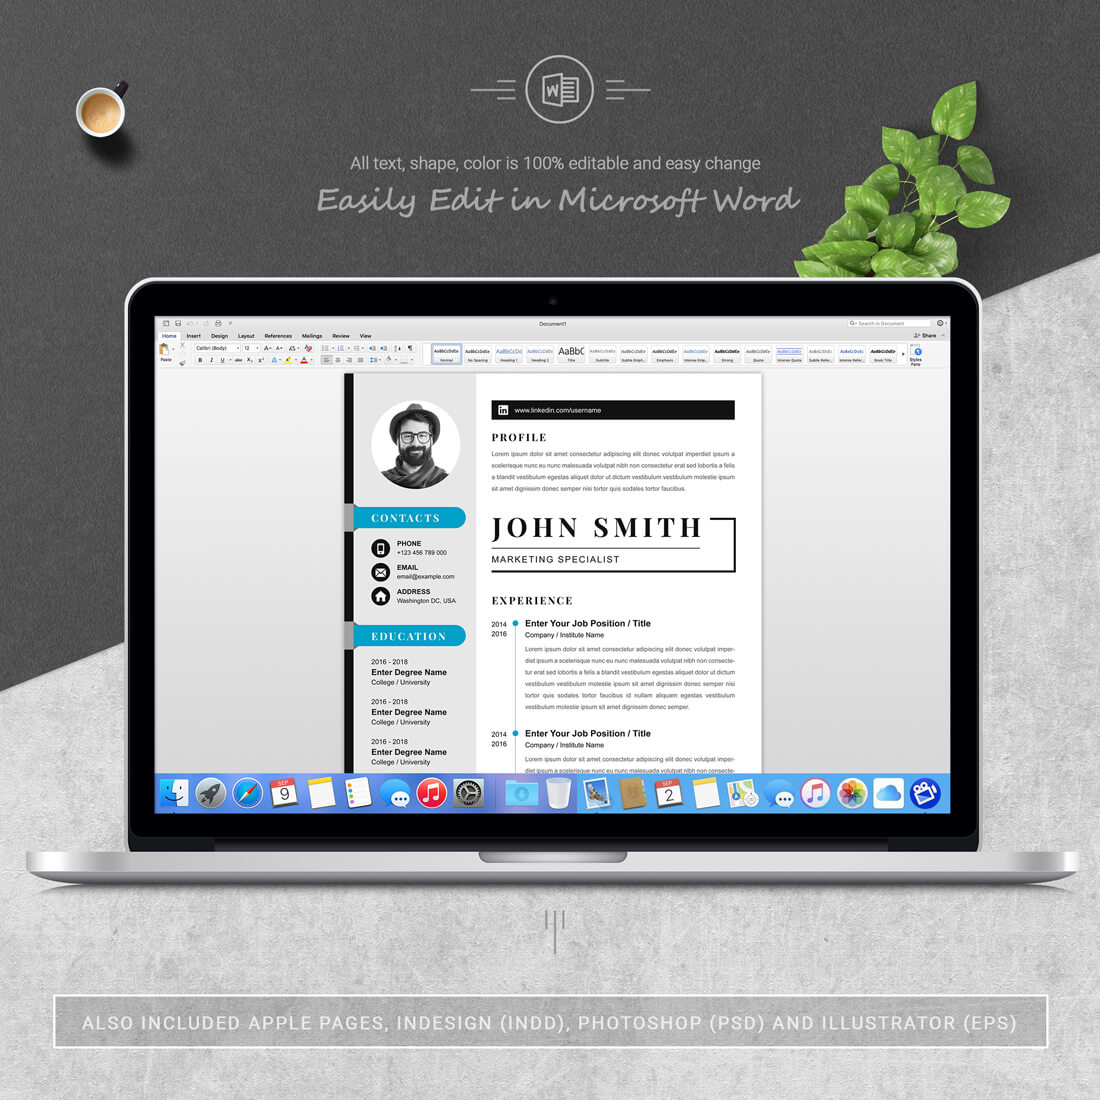 Laptop option of the Resume Template.